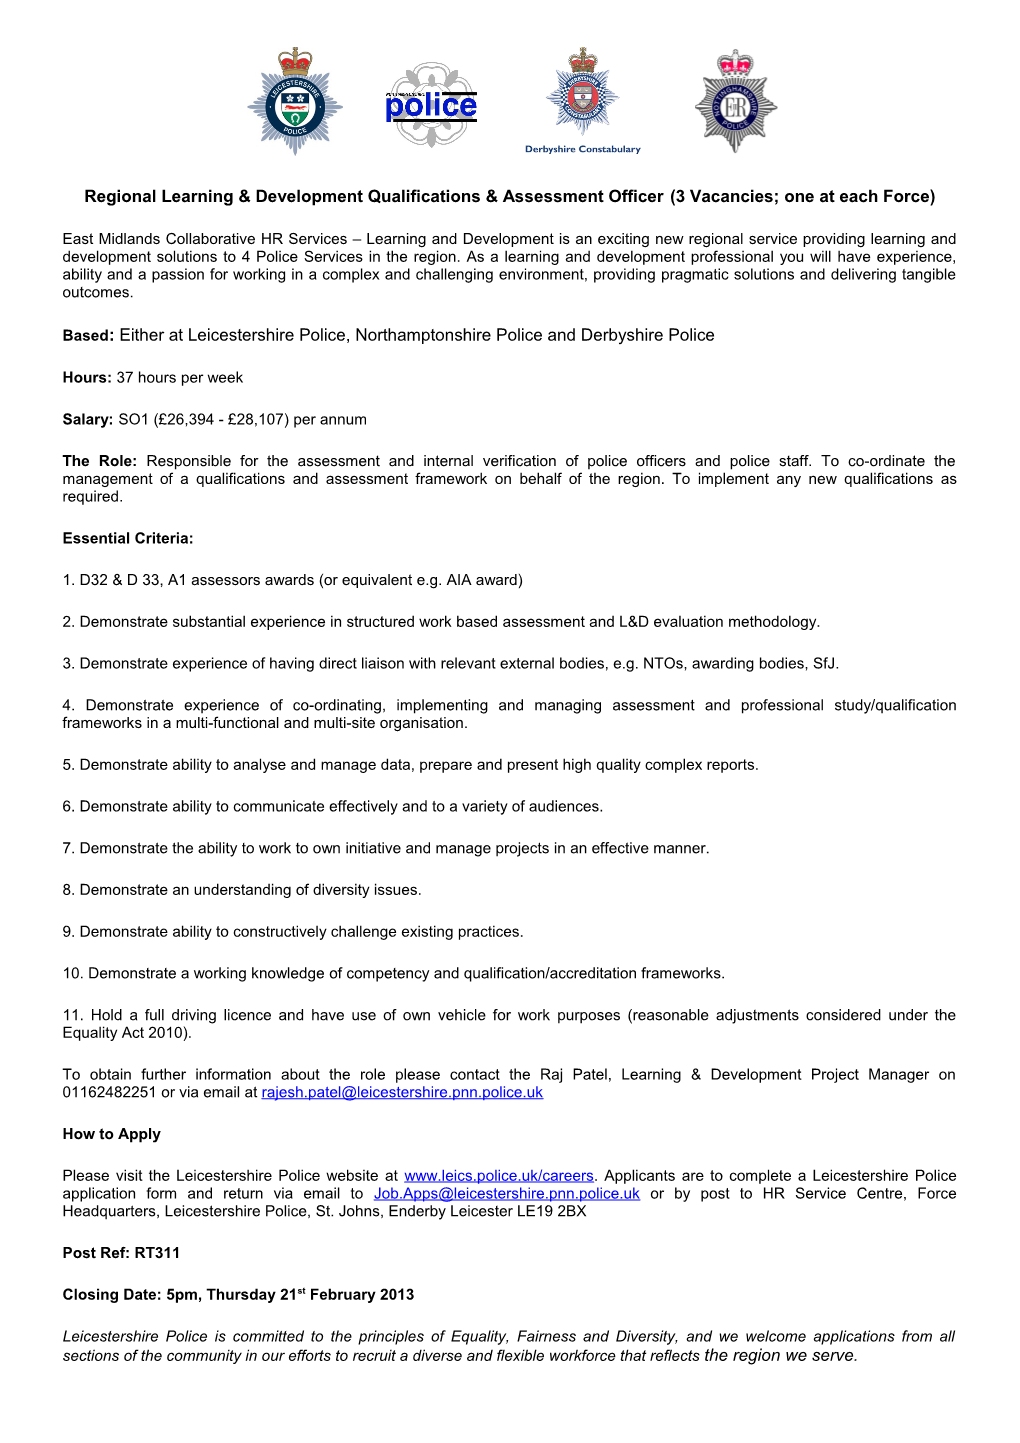 Regional Learning & Development Qualifications & Assessment Officer(3 Vacancies; One At